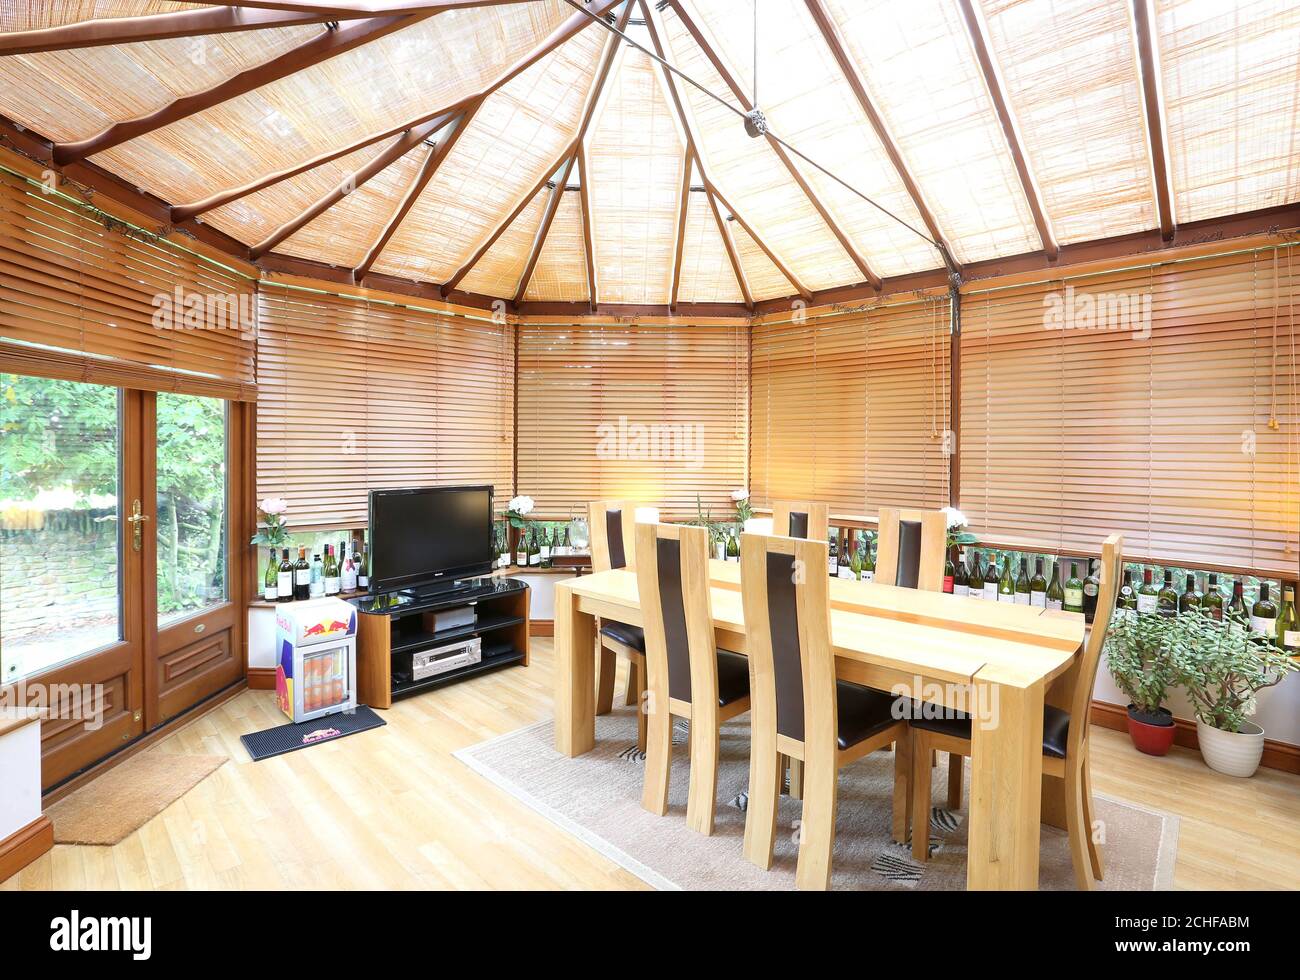 EDITORIAL USE ONLY Former England Rugby player James Haskell will be listing his property on Airbnb during the Rugby World Cup, so that fans of the sport who cannot travel to Japan will have the opportunity to enjoy the big sporting moment from his home in Northamptonshire instead. Stock Photo